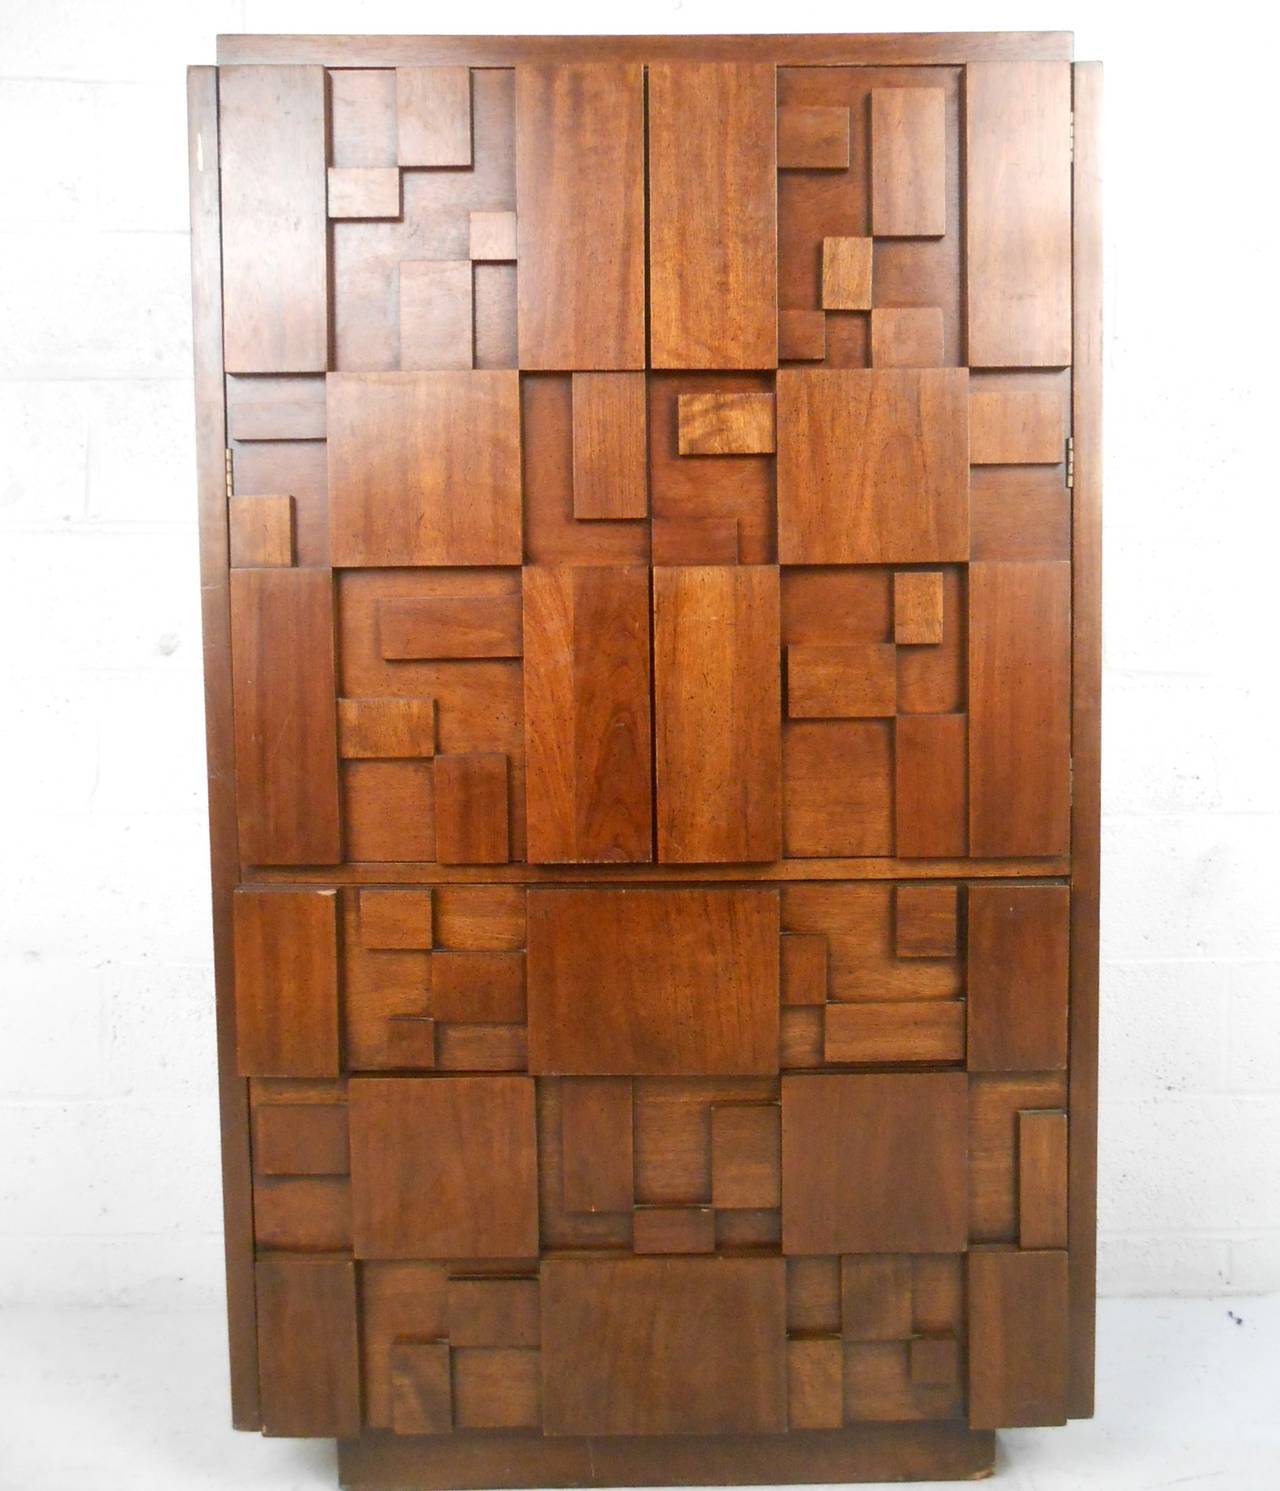 This unique gentleman's chest by Lane furniture features the brutalist mosaic style made popular by Paul Evans. Plenty of storage for any setting, unique cabinet portion features shelf space and extra drawer. Please confirm item location (NY or NJ).